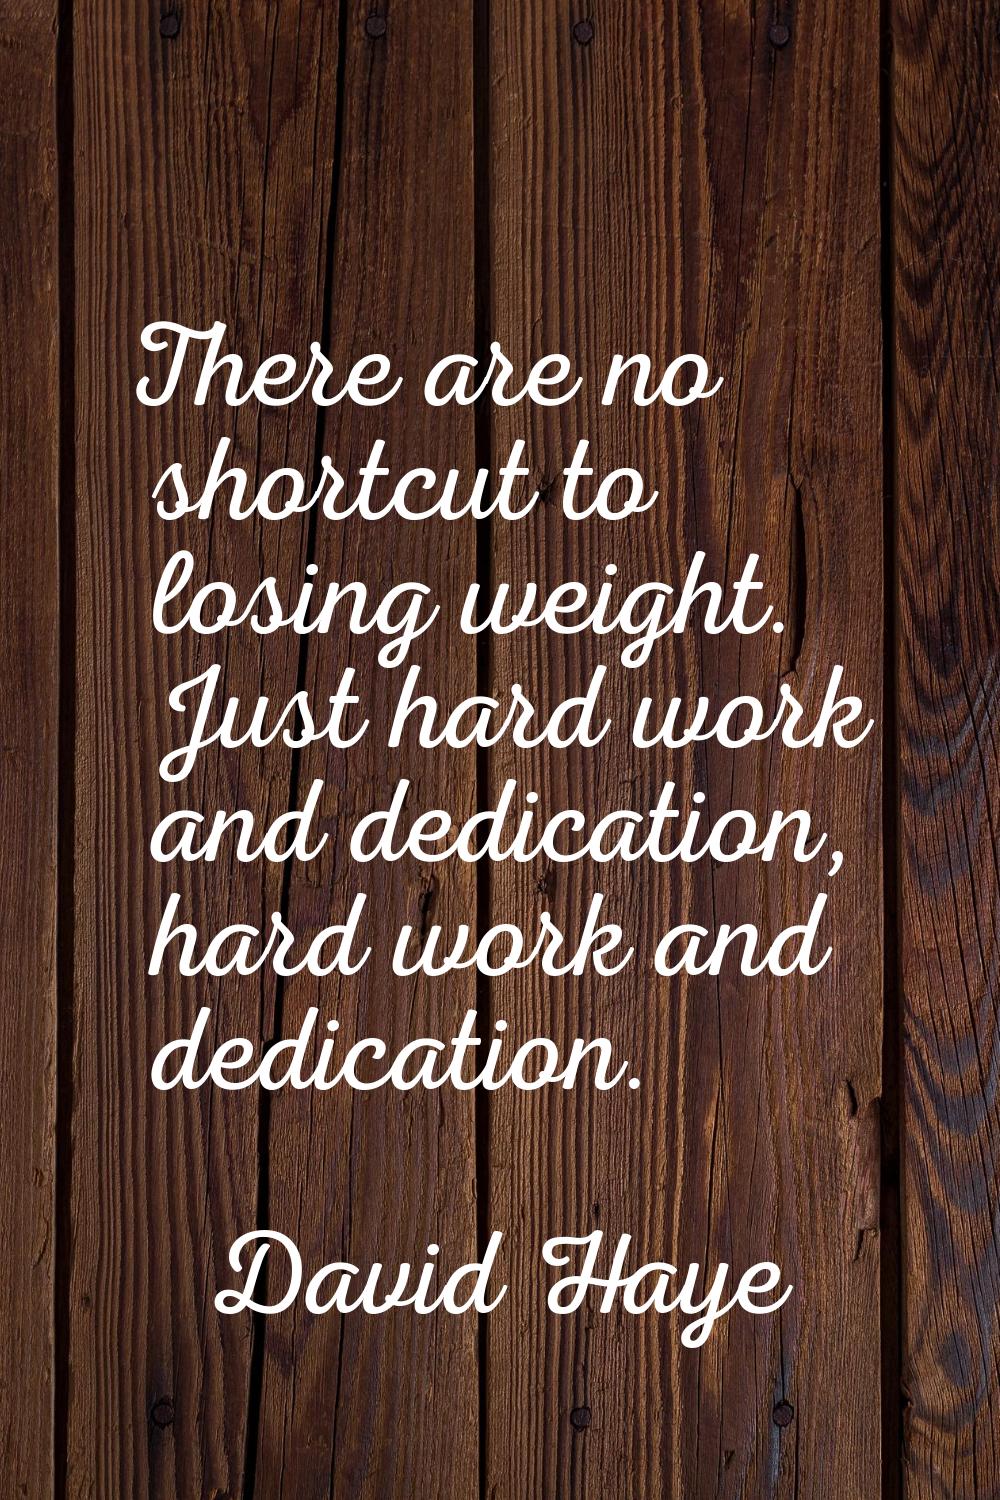 There are no shortcut to losing weight. Just hard work and dedication, hard work and dedication.